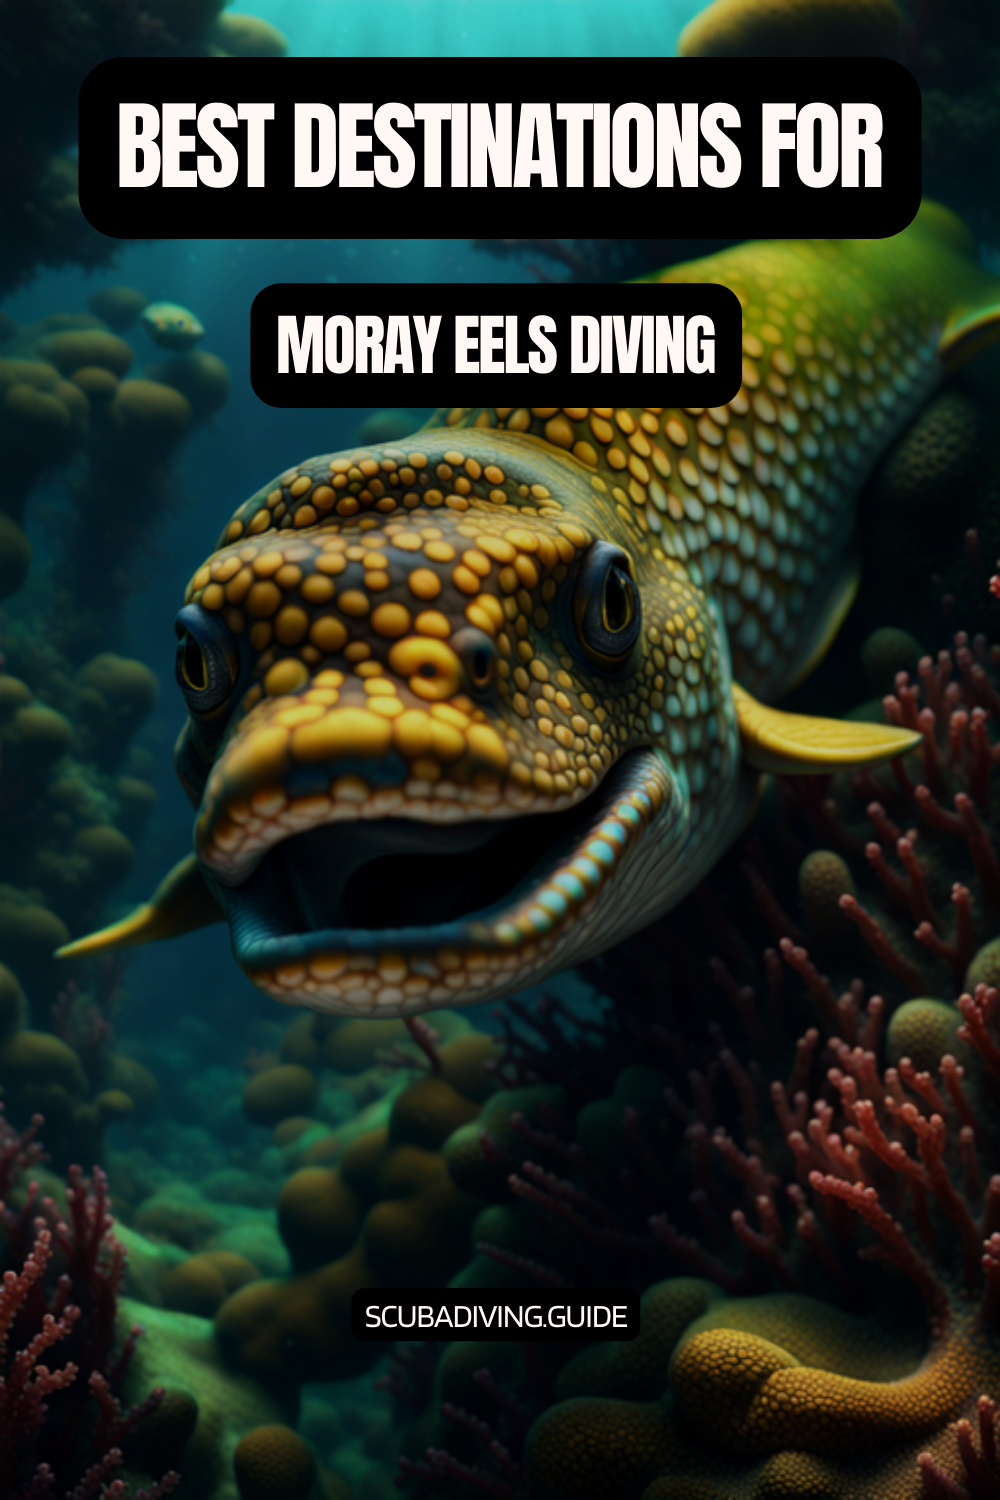 Best Destinations for Diving with Moray Eels